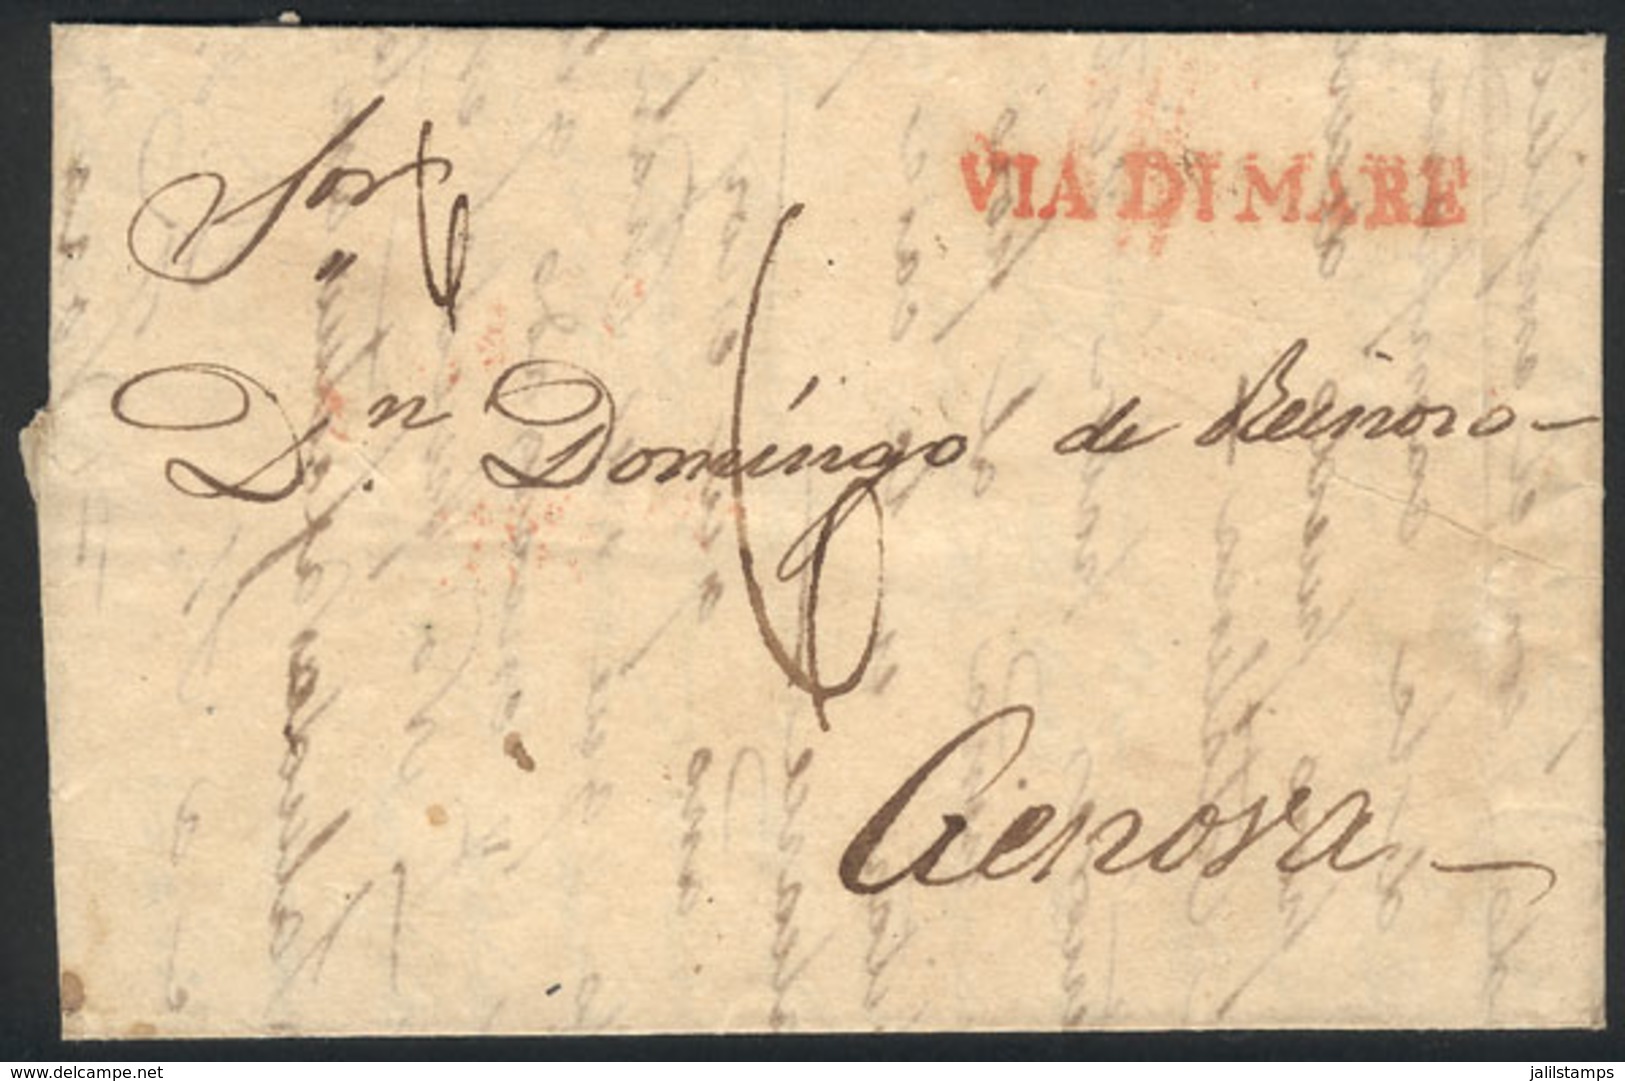 ARGENTINA: 15/JUL/1830 BUENOS AIRES - Genova (Italy): Entire Letter That Received The Straightline VIA DI MARE Marking I - Other & Unclassified